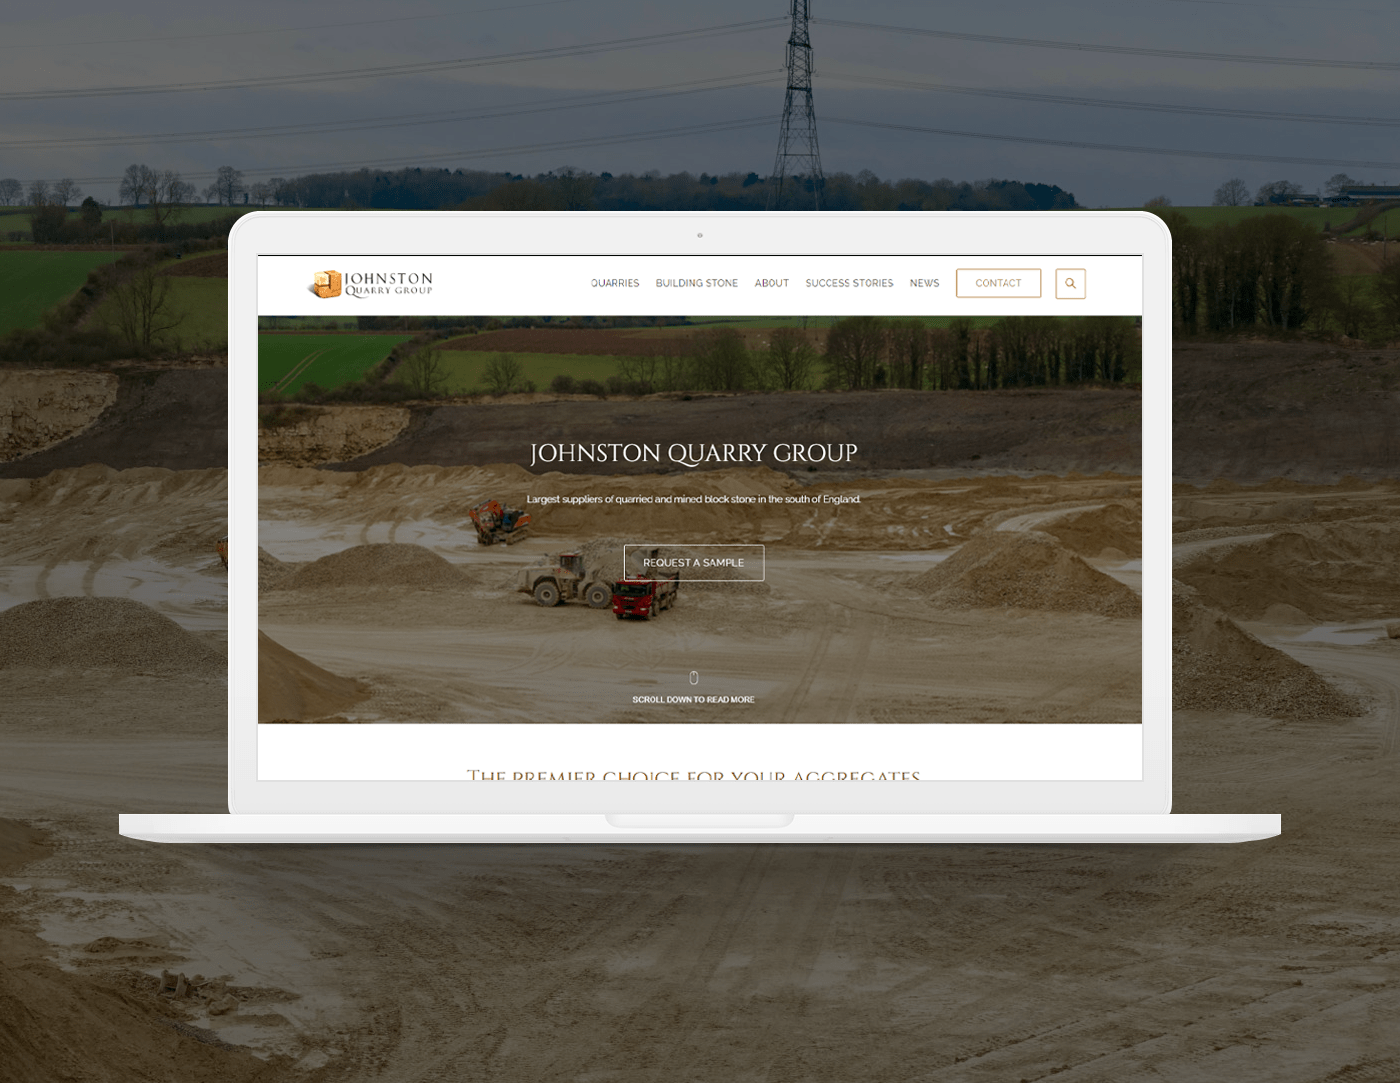 Announcing the launch of our new website - jqgroup.co.uk